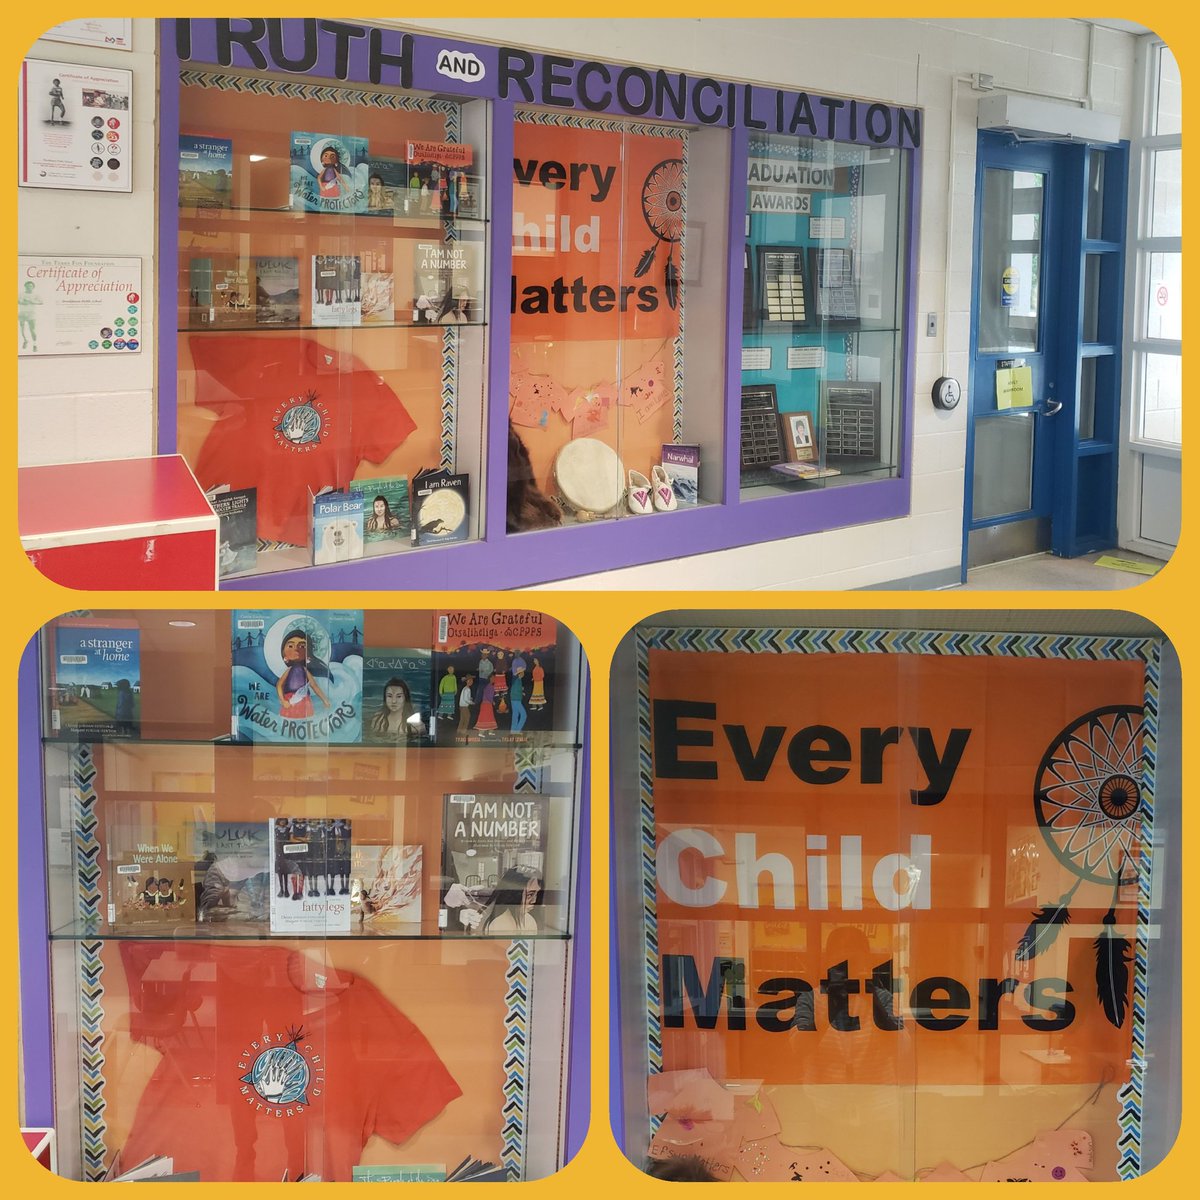 @brookhaven_ps @kwamelennon Brookhaven Public School is proudly preparing for Orange Shirt Day and National Day for Truth and Reconciliation this Friday September 30. Thank you to Ms. Anderson and Ms. Gyamfuah-Boakye for our school display. #OrangeShirtDay #EveryChildMatters